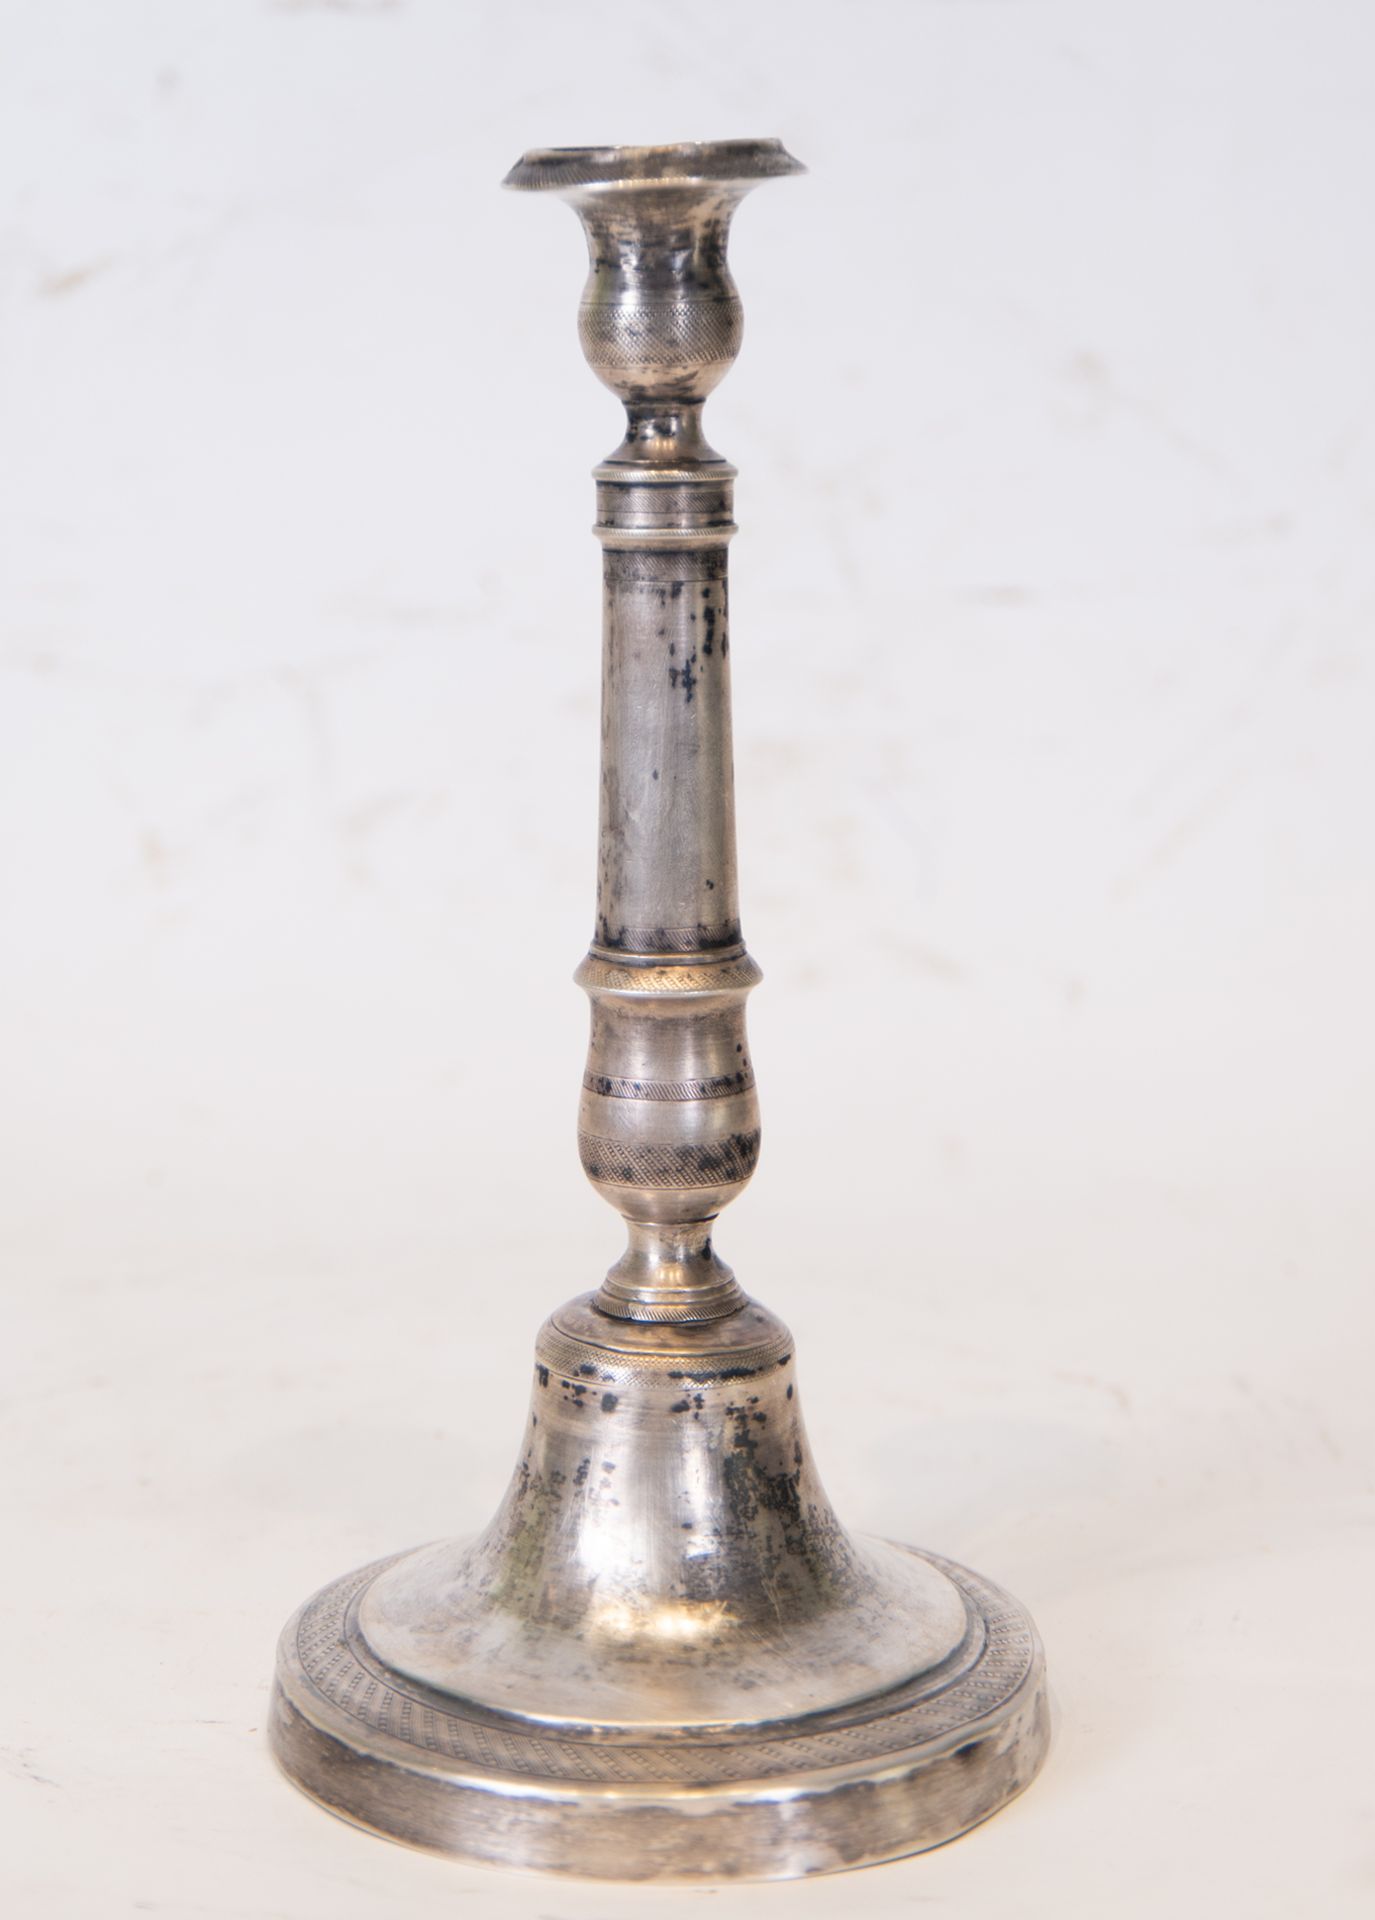 Pair of rare Fernandino candlesticks in solid silver, Spanish school of the 18th - 19th century - Image 5 of 8